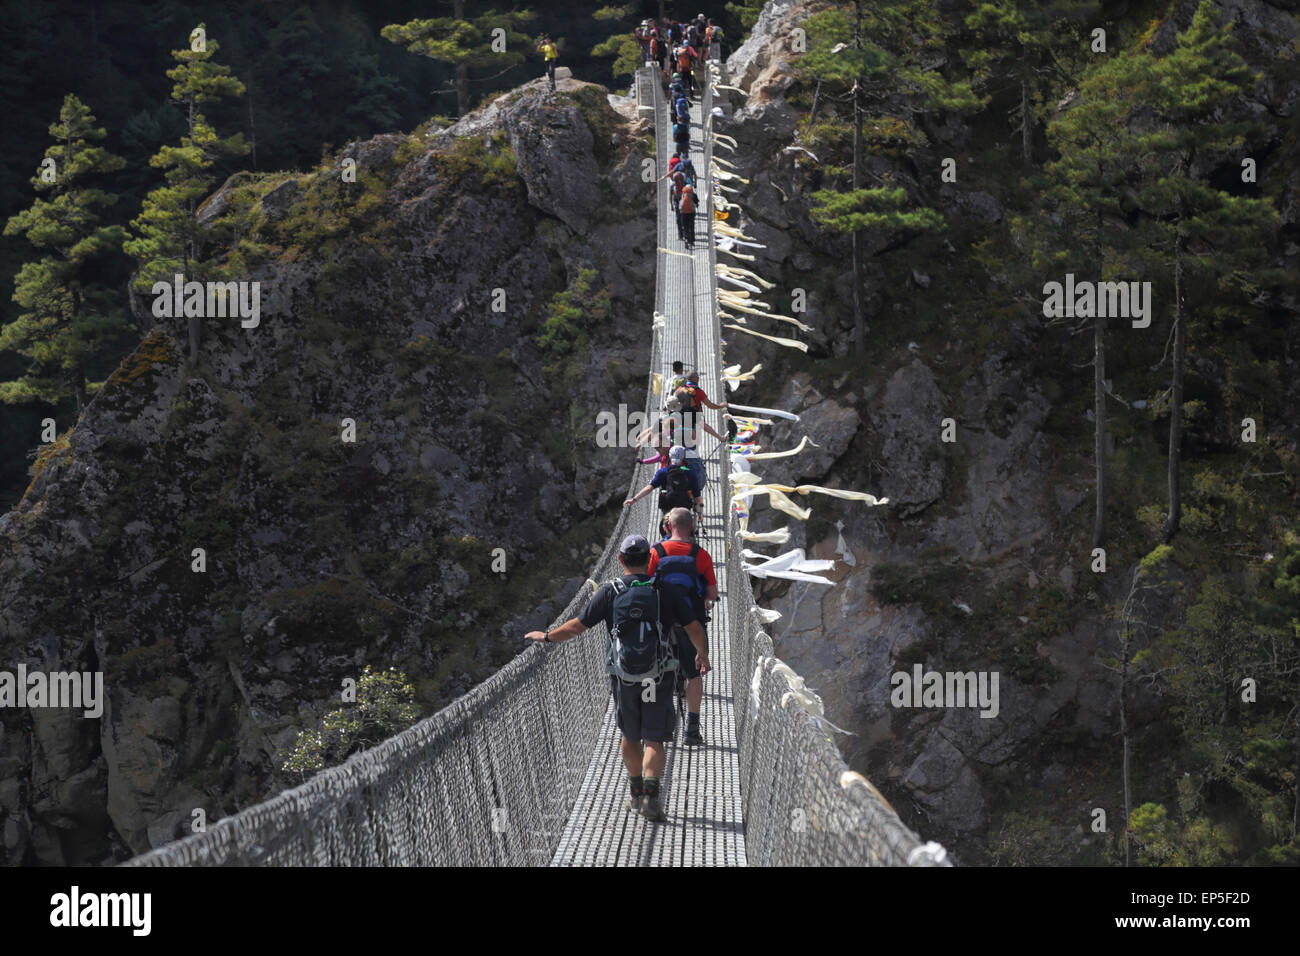 The Everest Base Camp trek crosses the Dudh Kosi River over new wire suspension bridges on the way to Namche Bazaar, Stock Photo